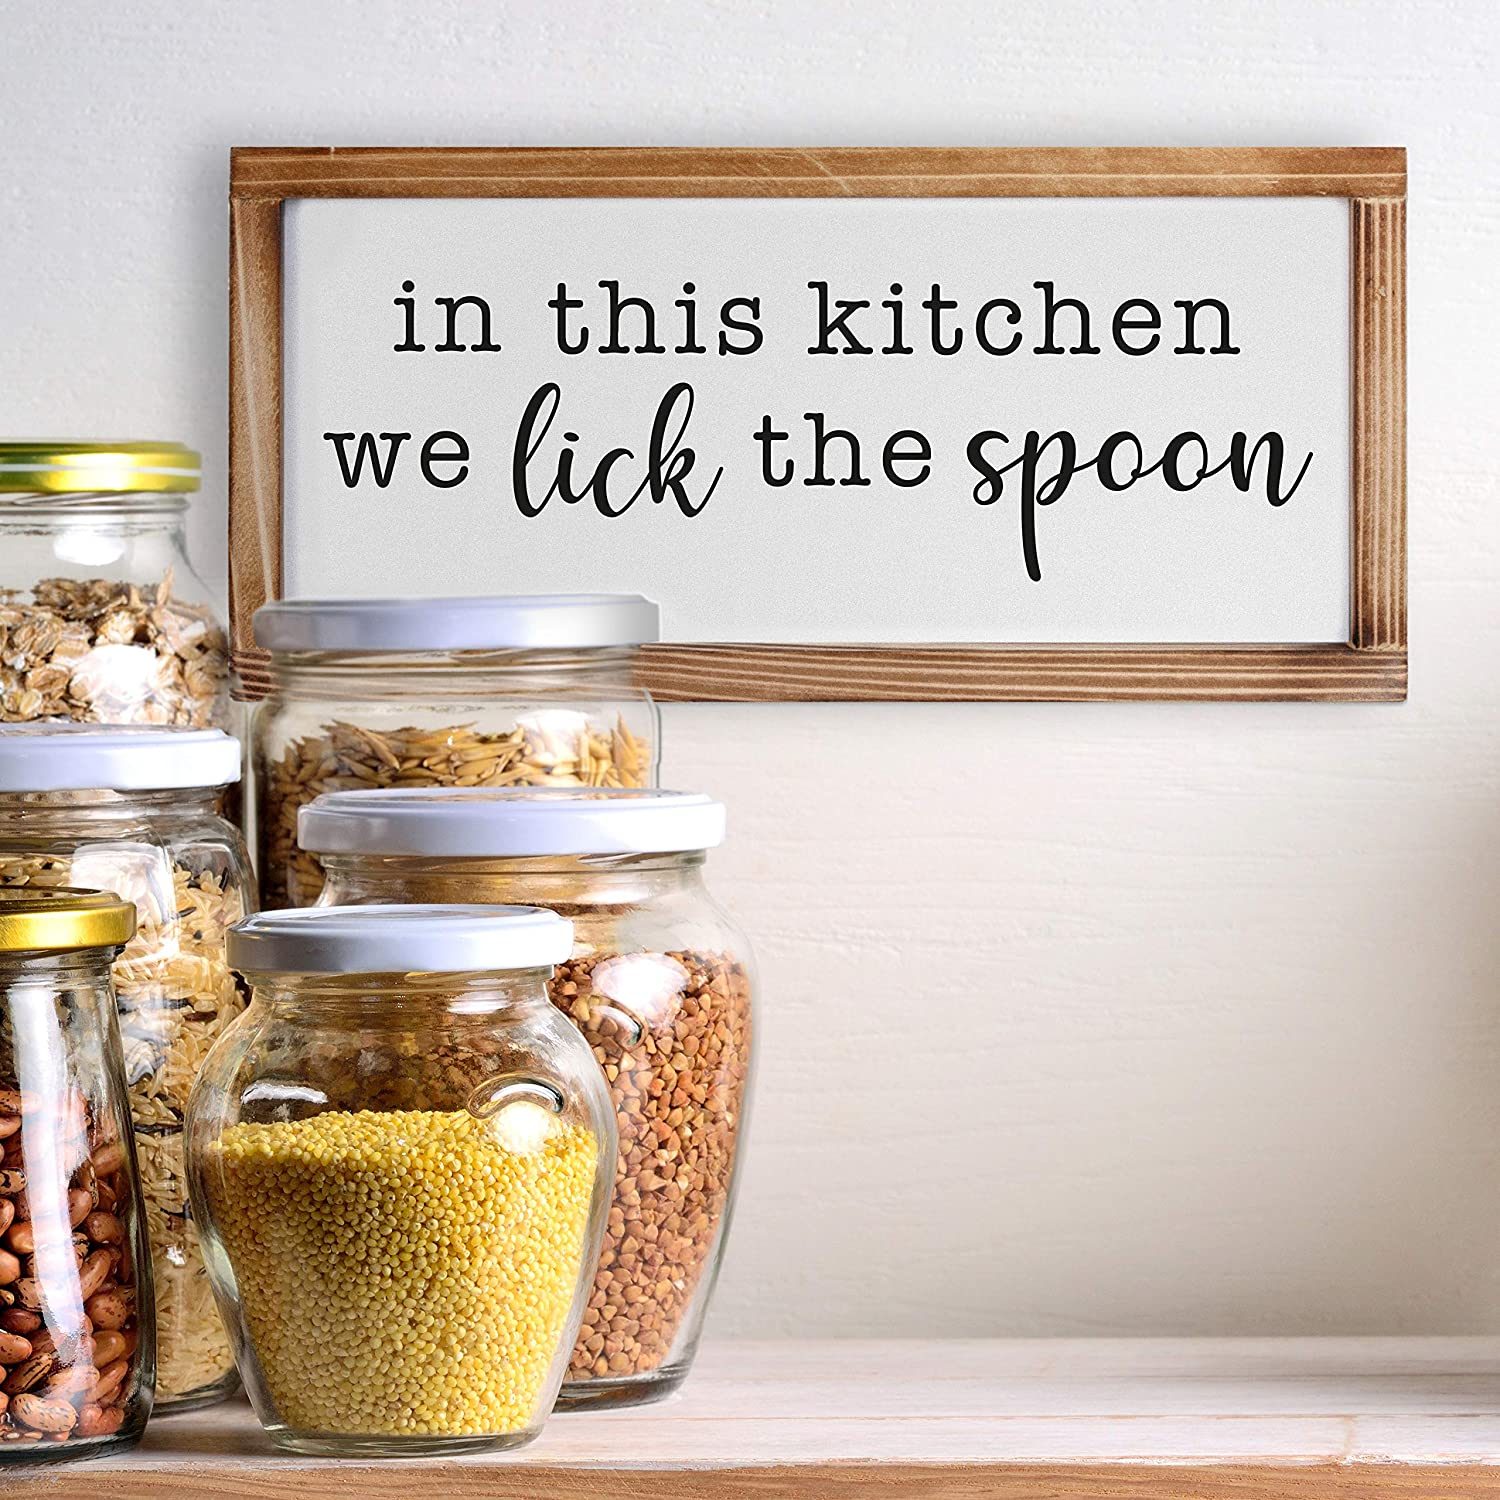 https://www.tasteofhome.com/wp-content/uploads/2021/09/In-This-Kitchen-We-Lick-the-Spoon-Sign.jpg?fit=700%2C700